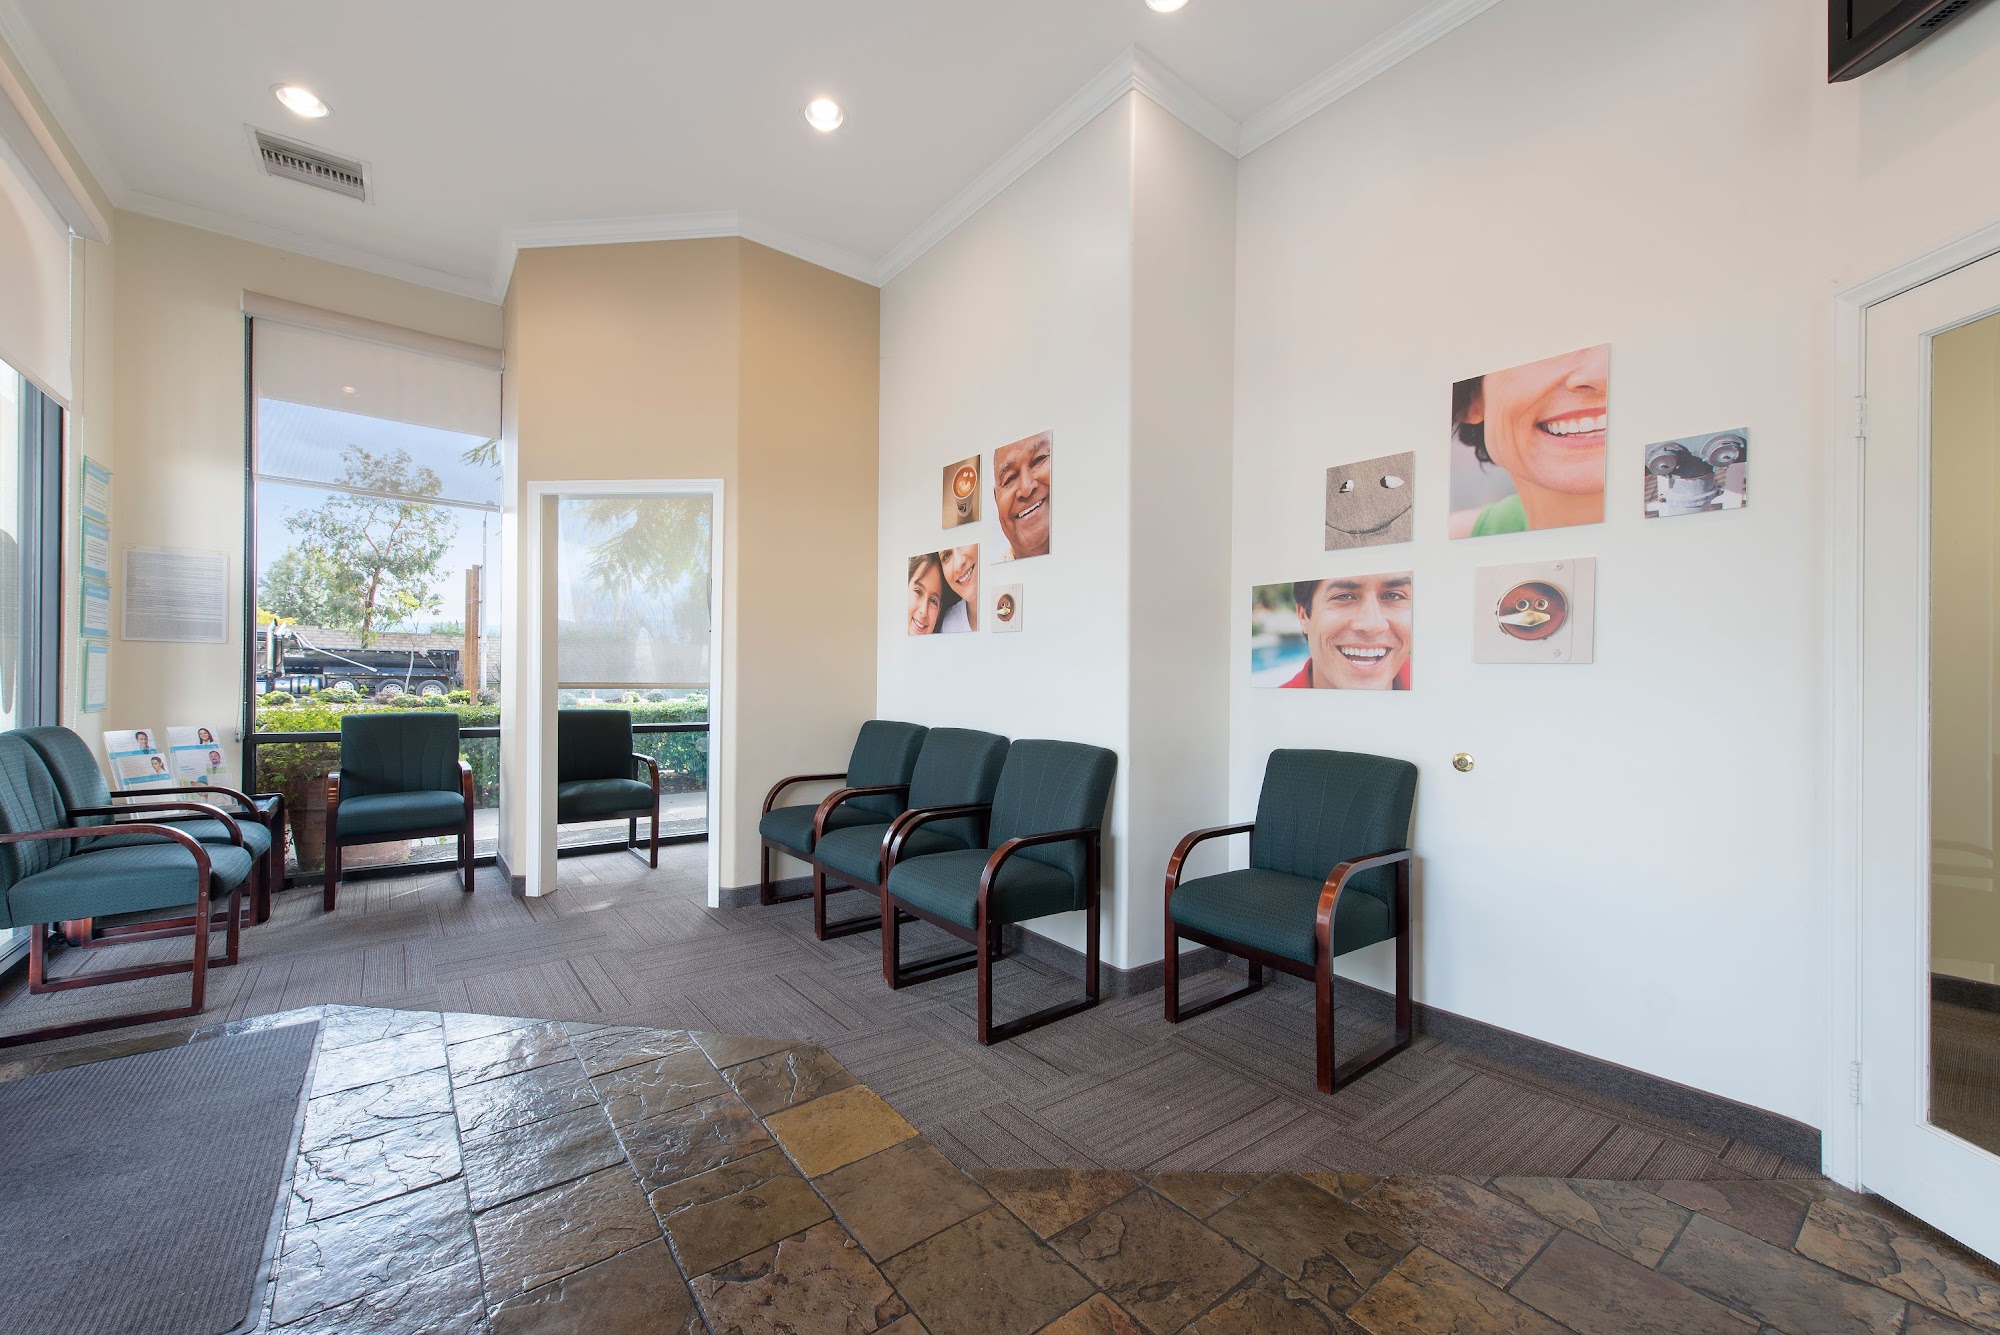 Hasley Canyon Dental Group 29655 The Old Rd, Castaic California 91384